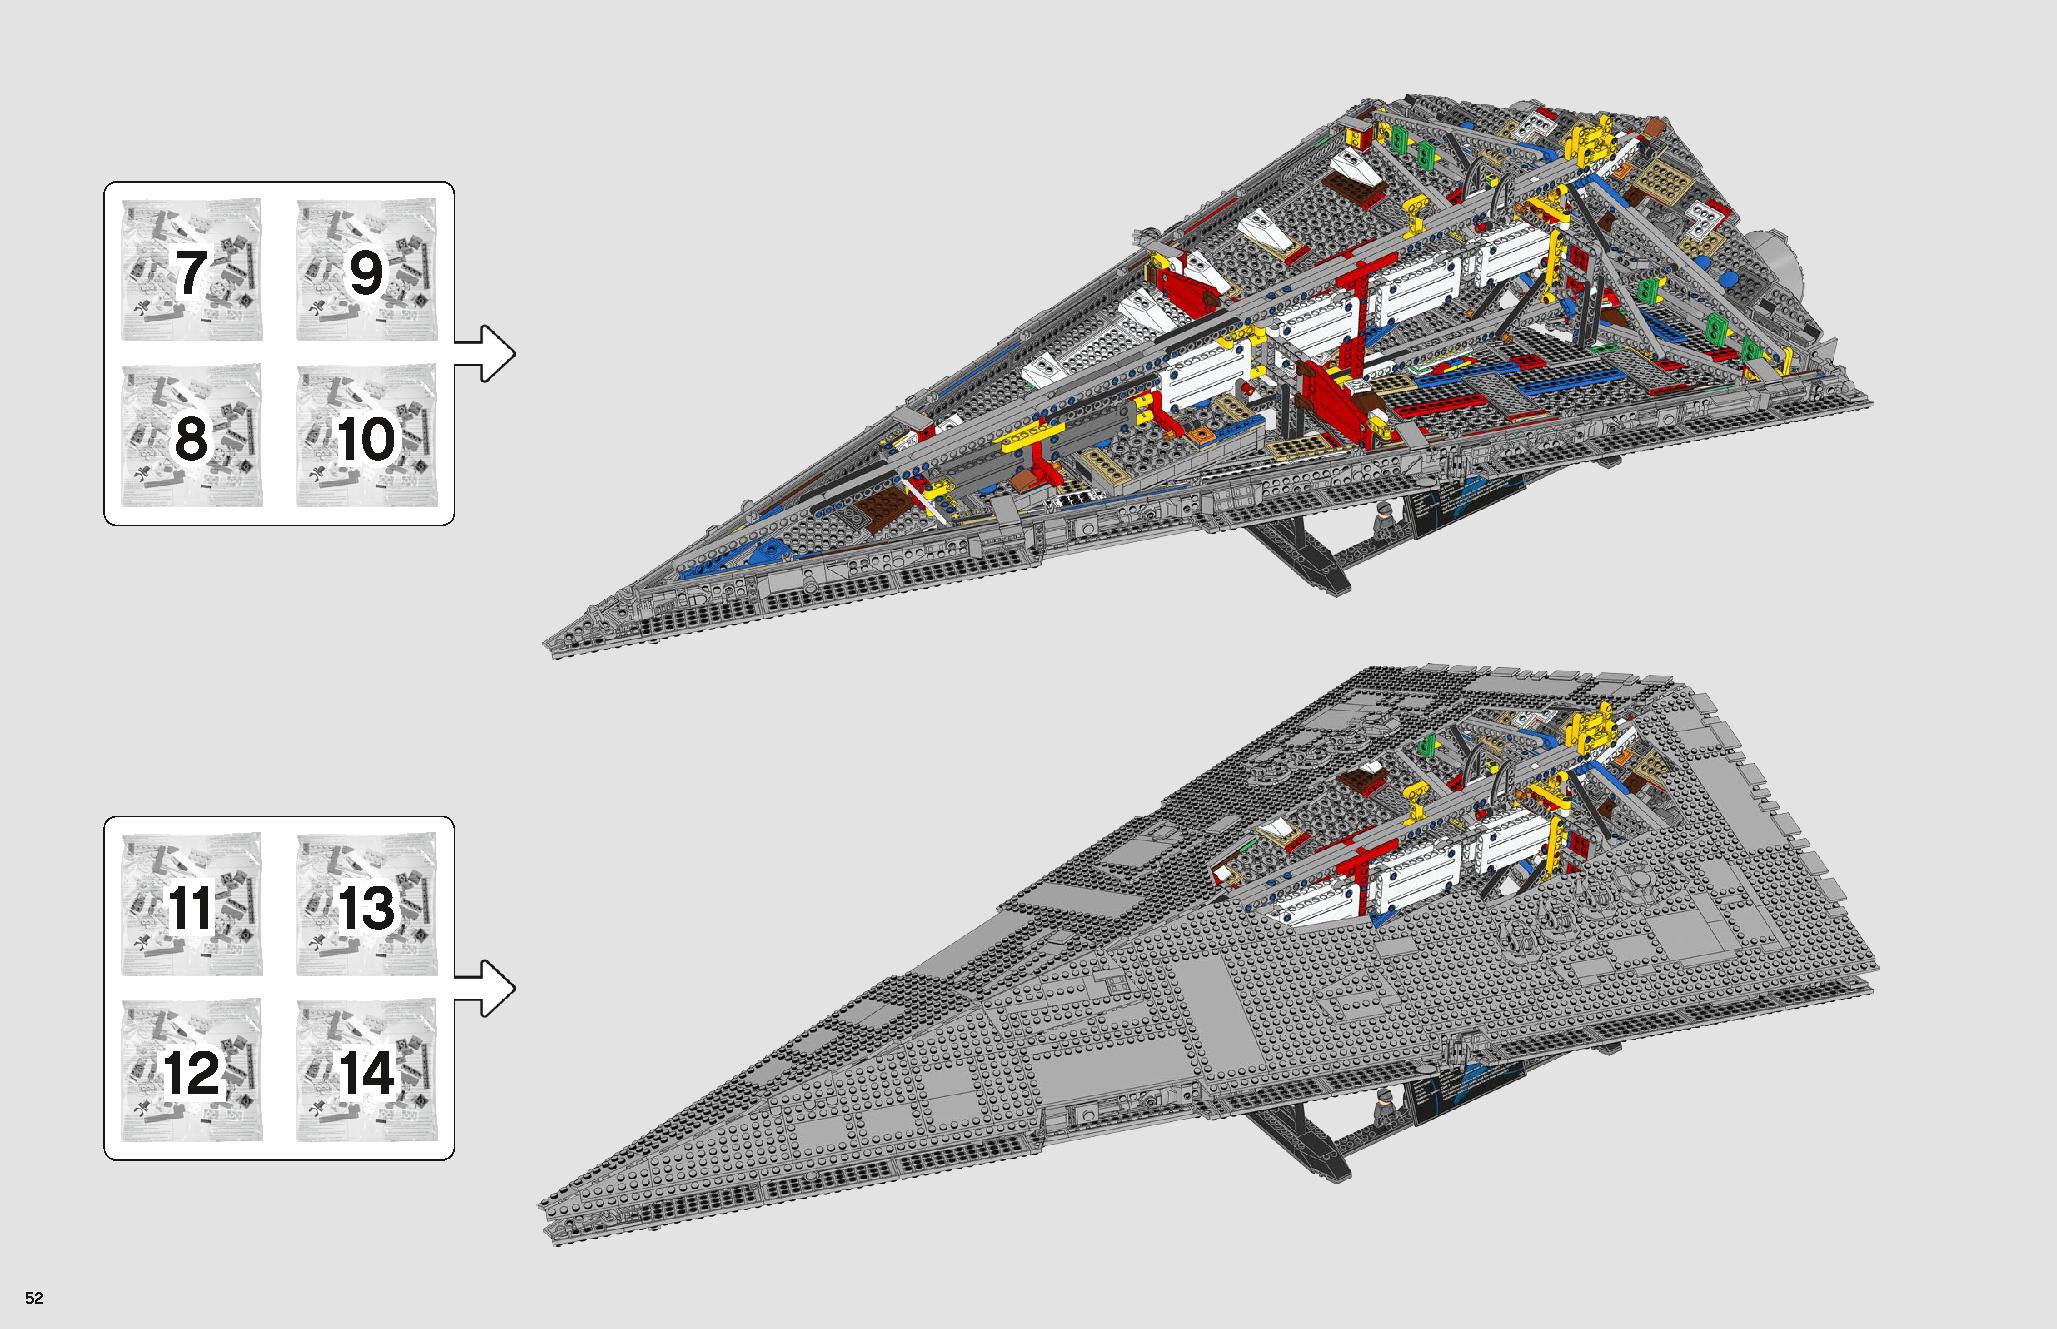 Imperial Star Destroyer 75252 LEGO information LEGO instructions 52 page